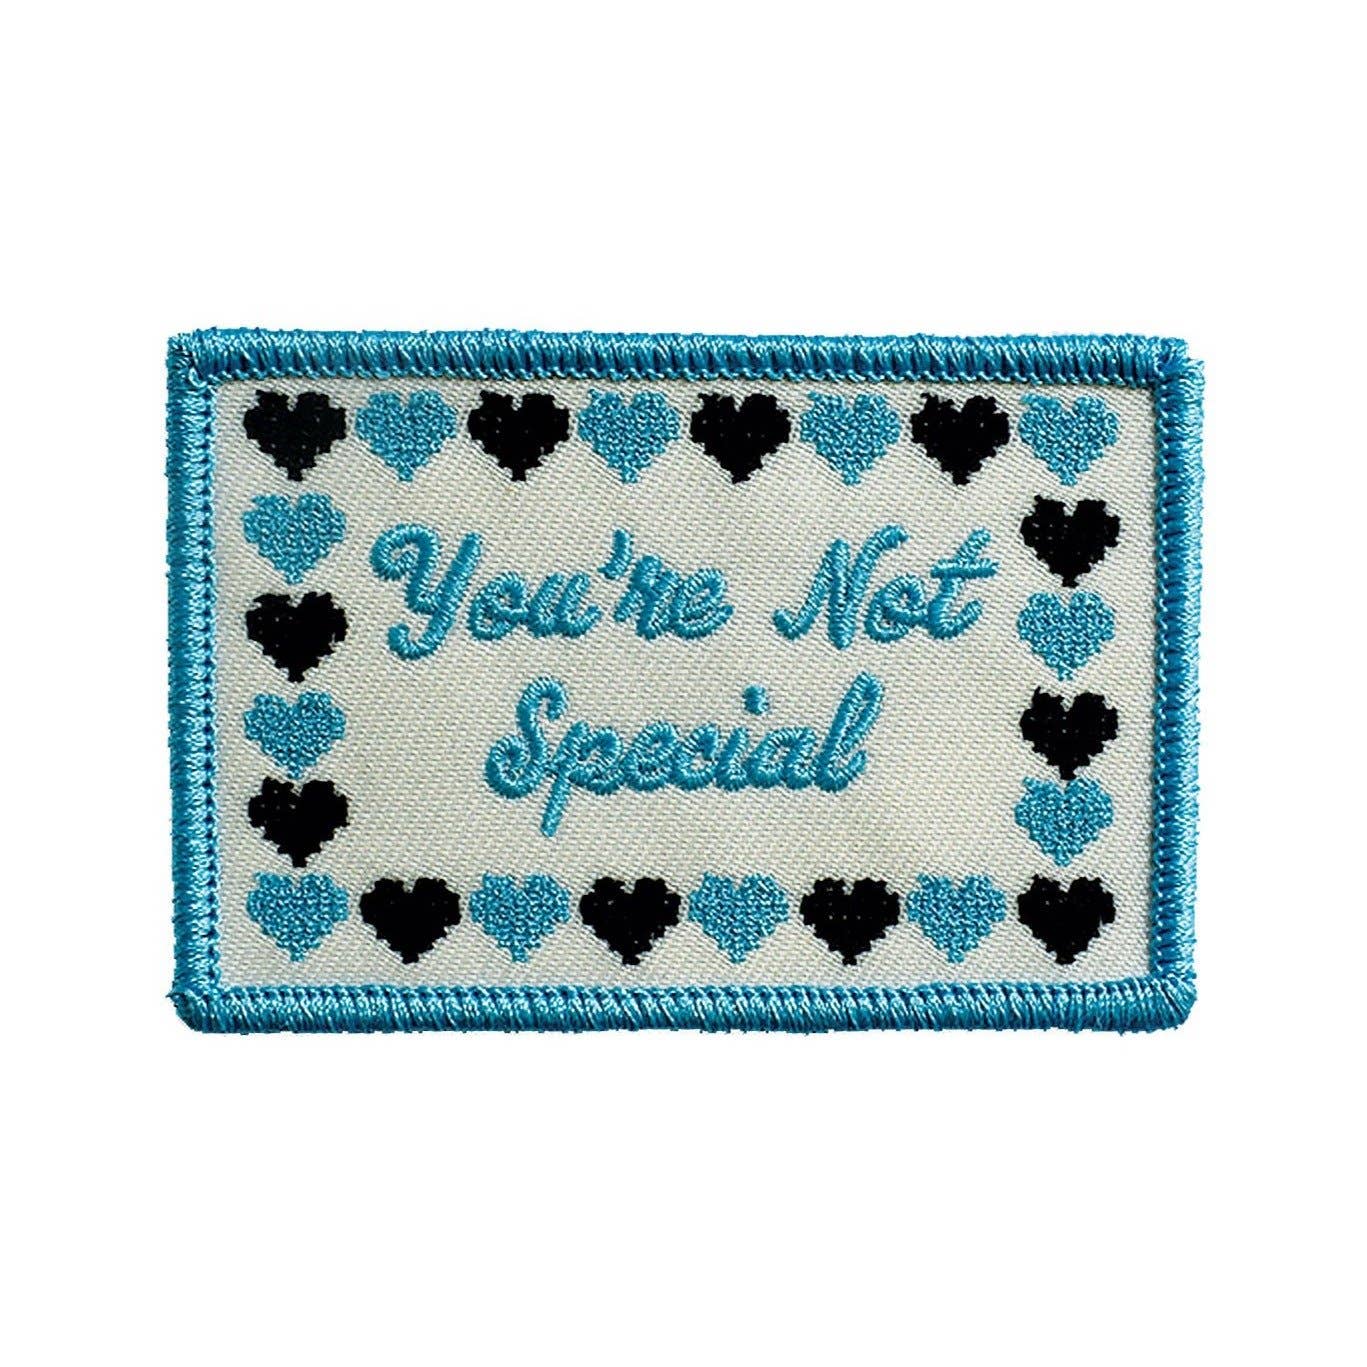 You're Not Special Embroidered Patch